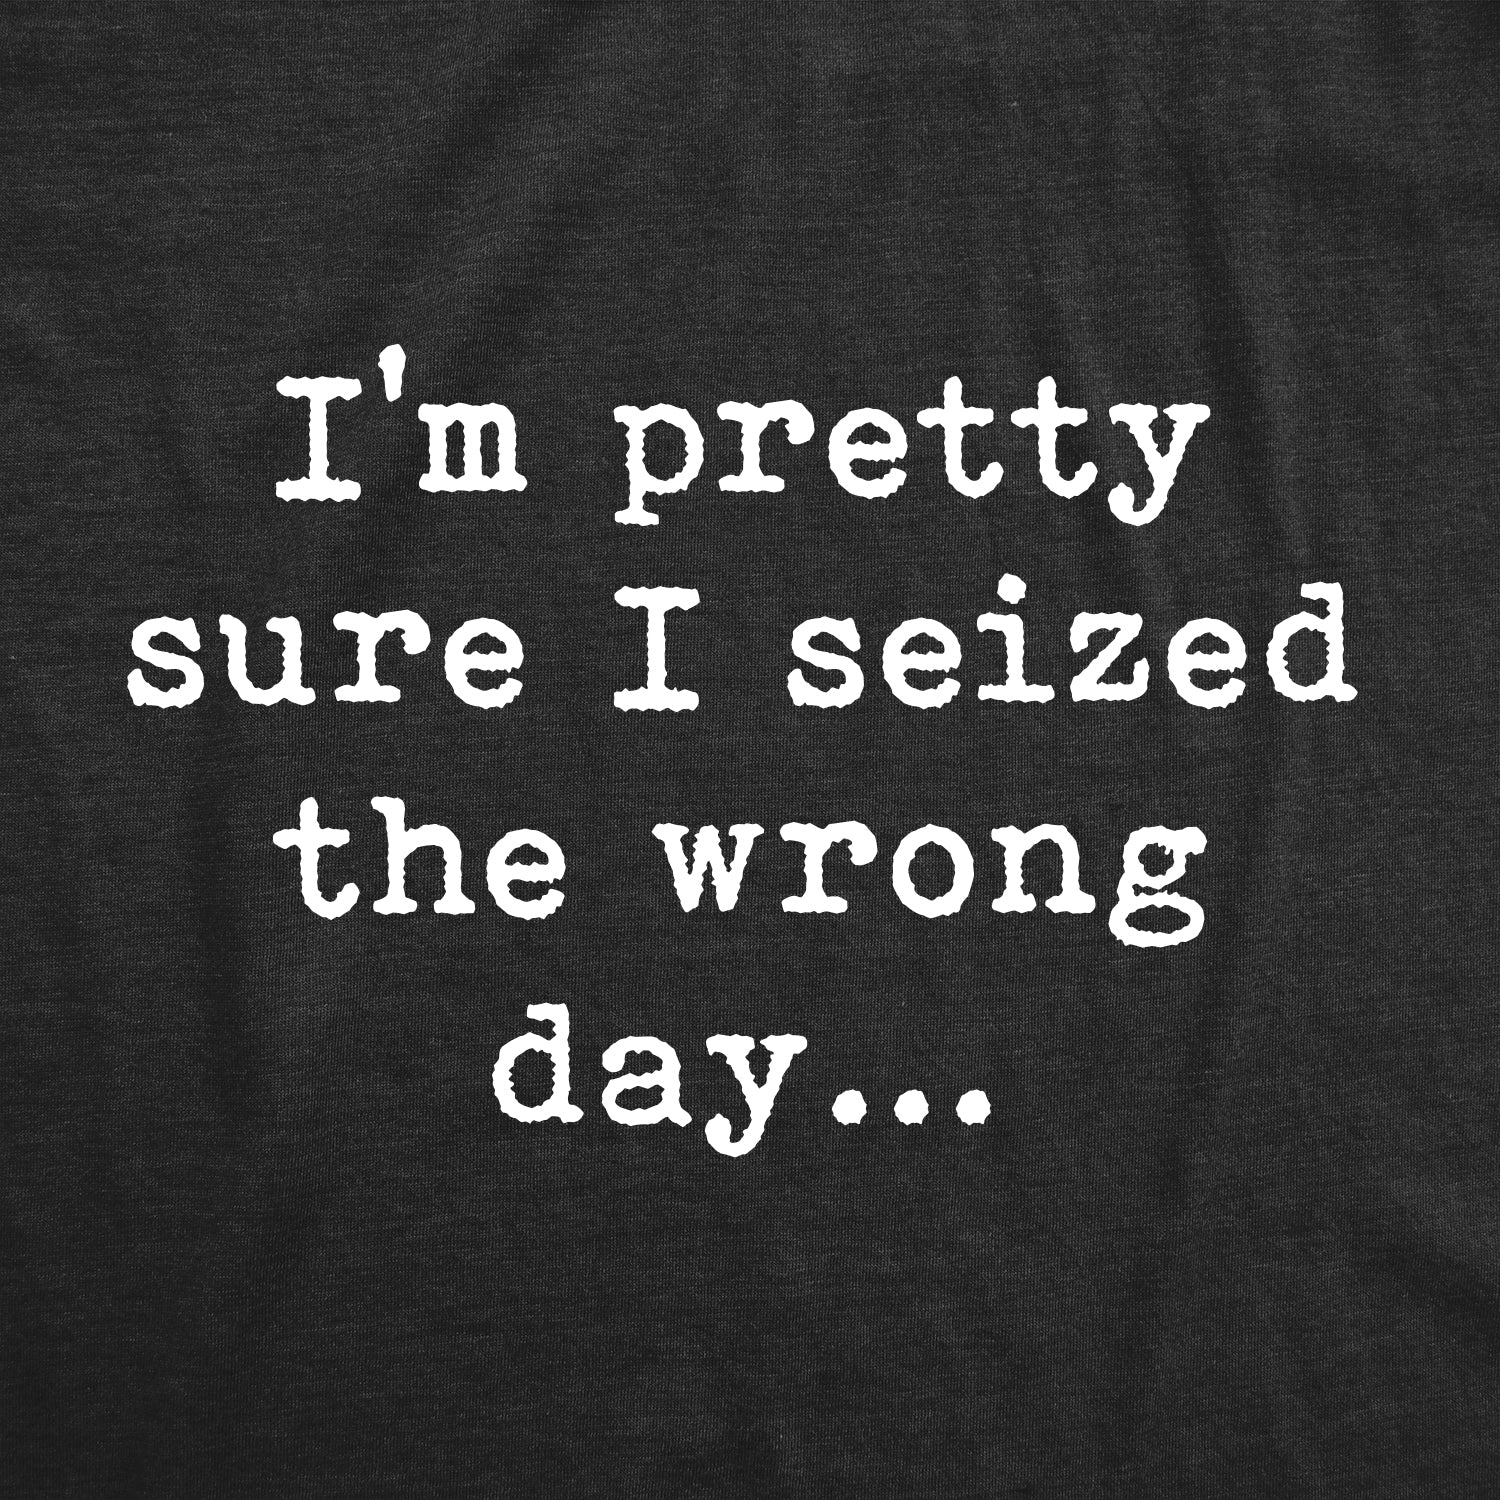 Funny Heather Black Pretty Sure I Seized The Wrong Day Mens T Shirt Nerdy Sarcastic Nerdy Tee